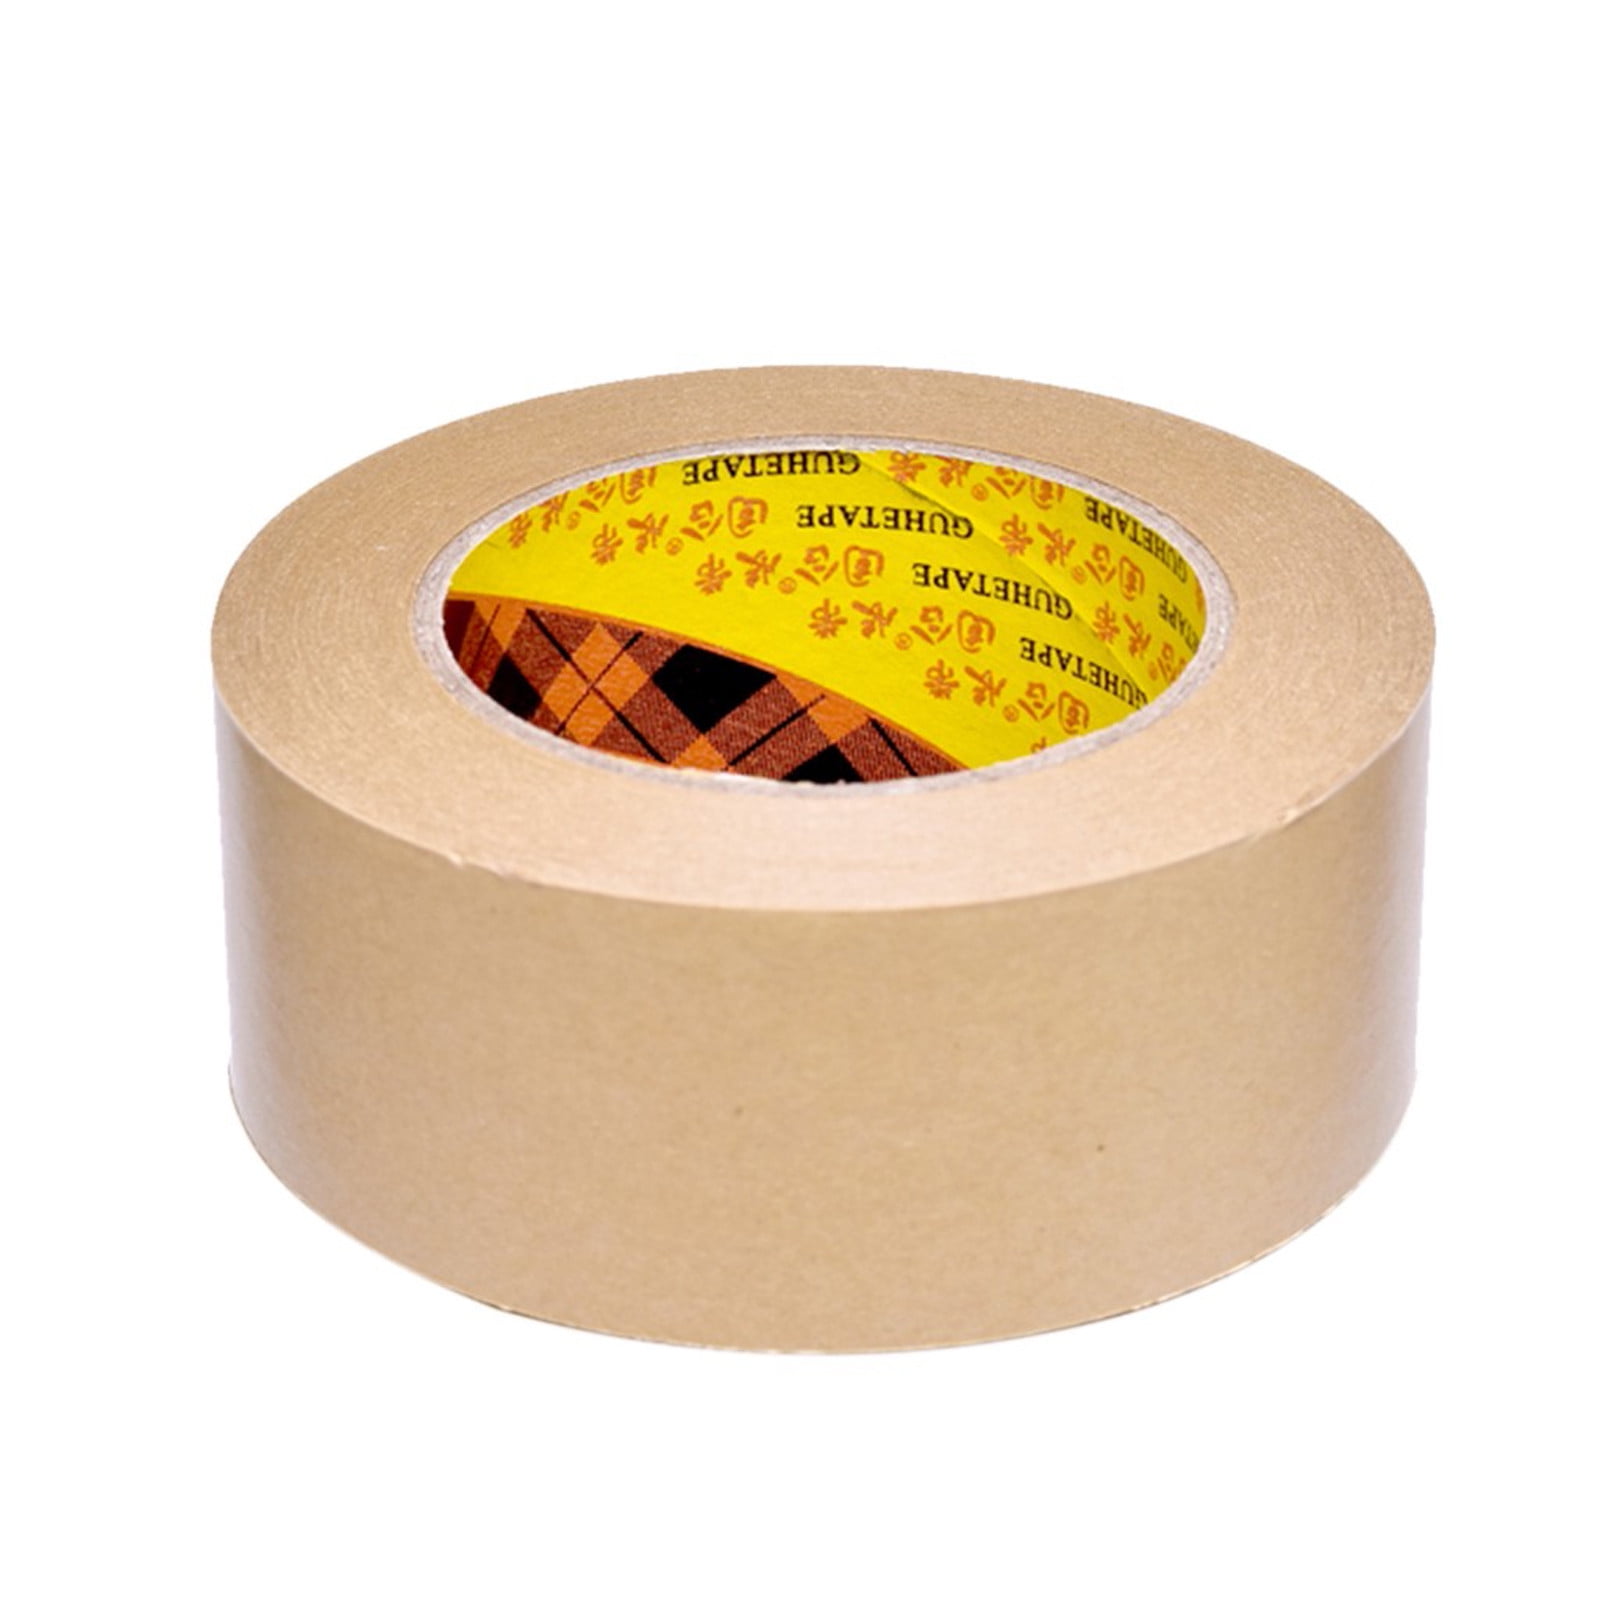 6 Rolls Colored Painters Tape Labelling or Coding Rolls for Home